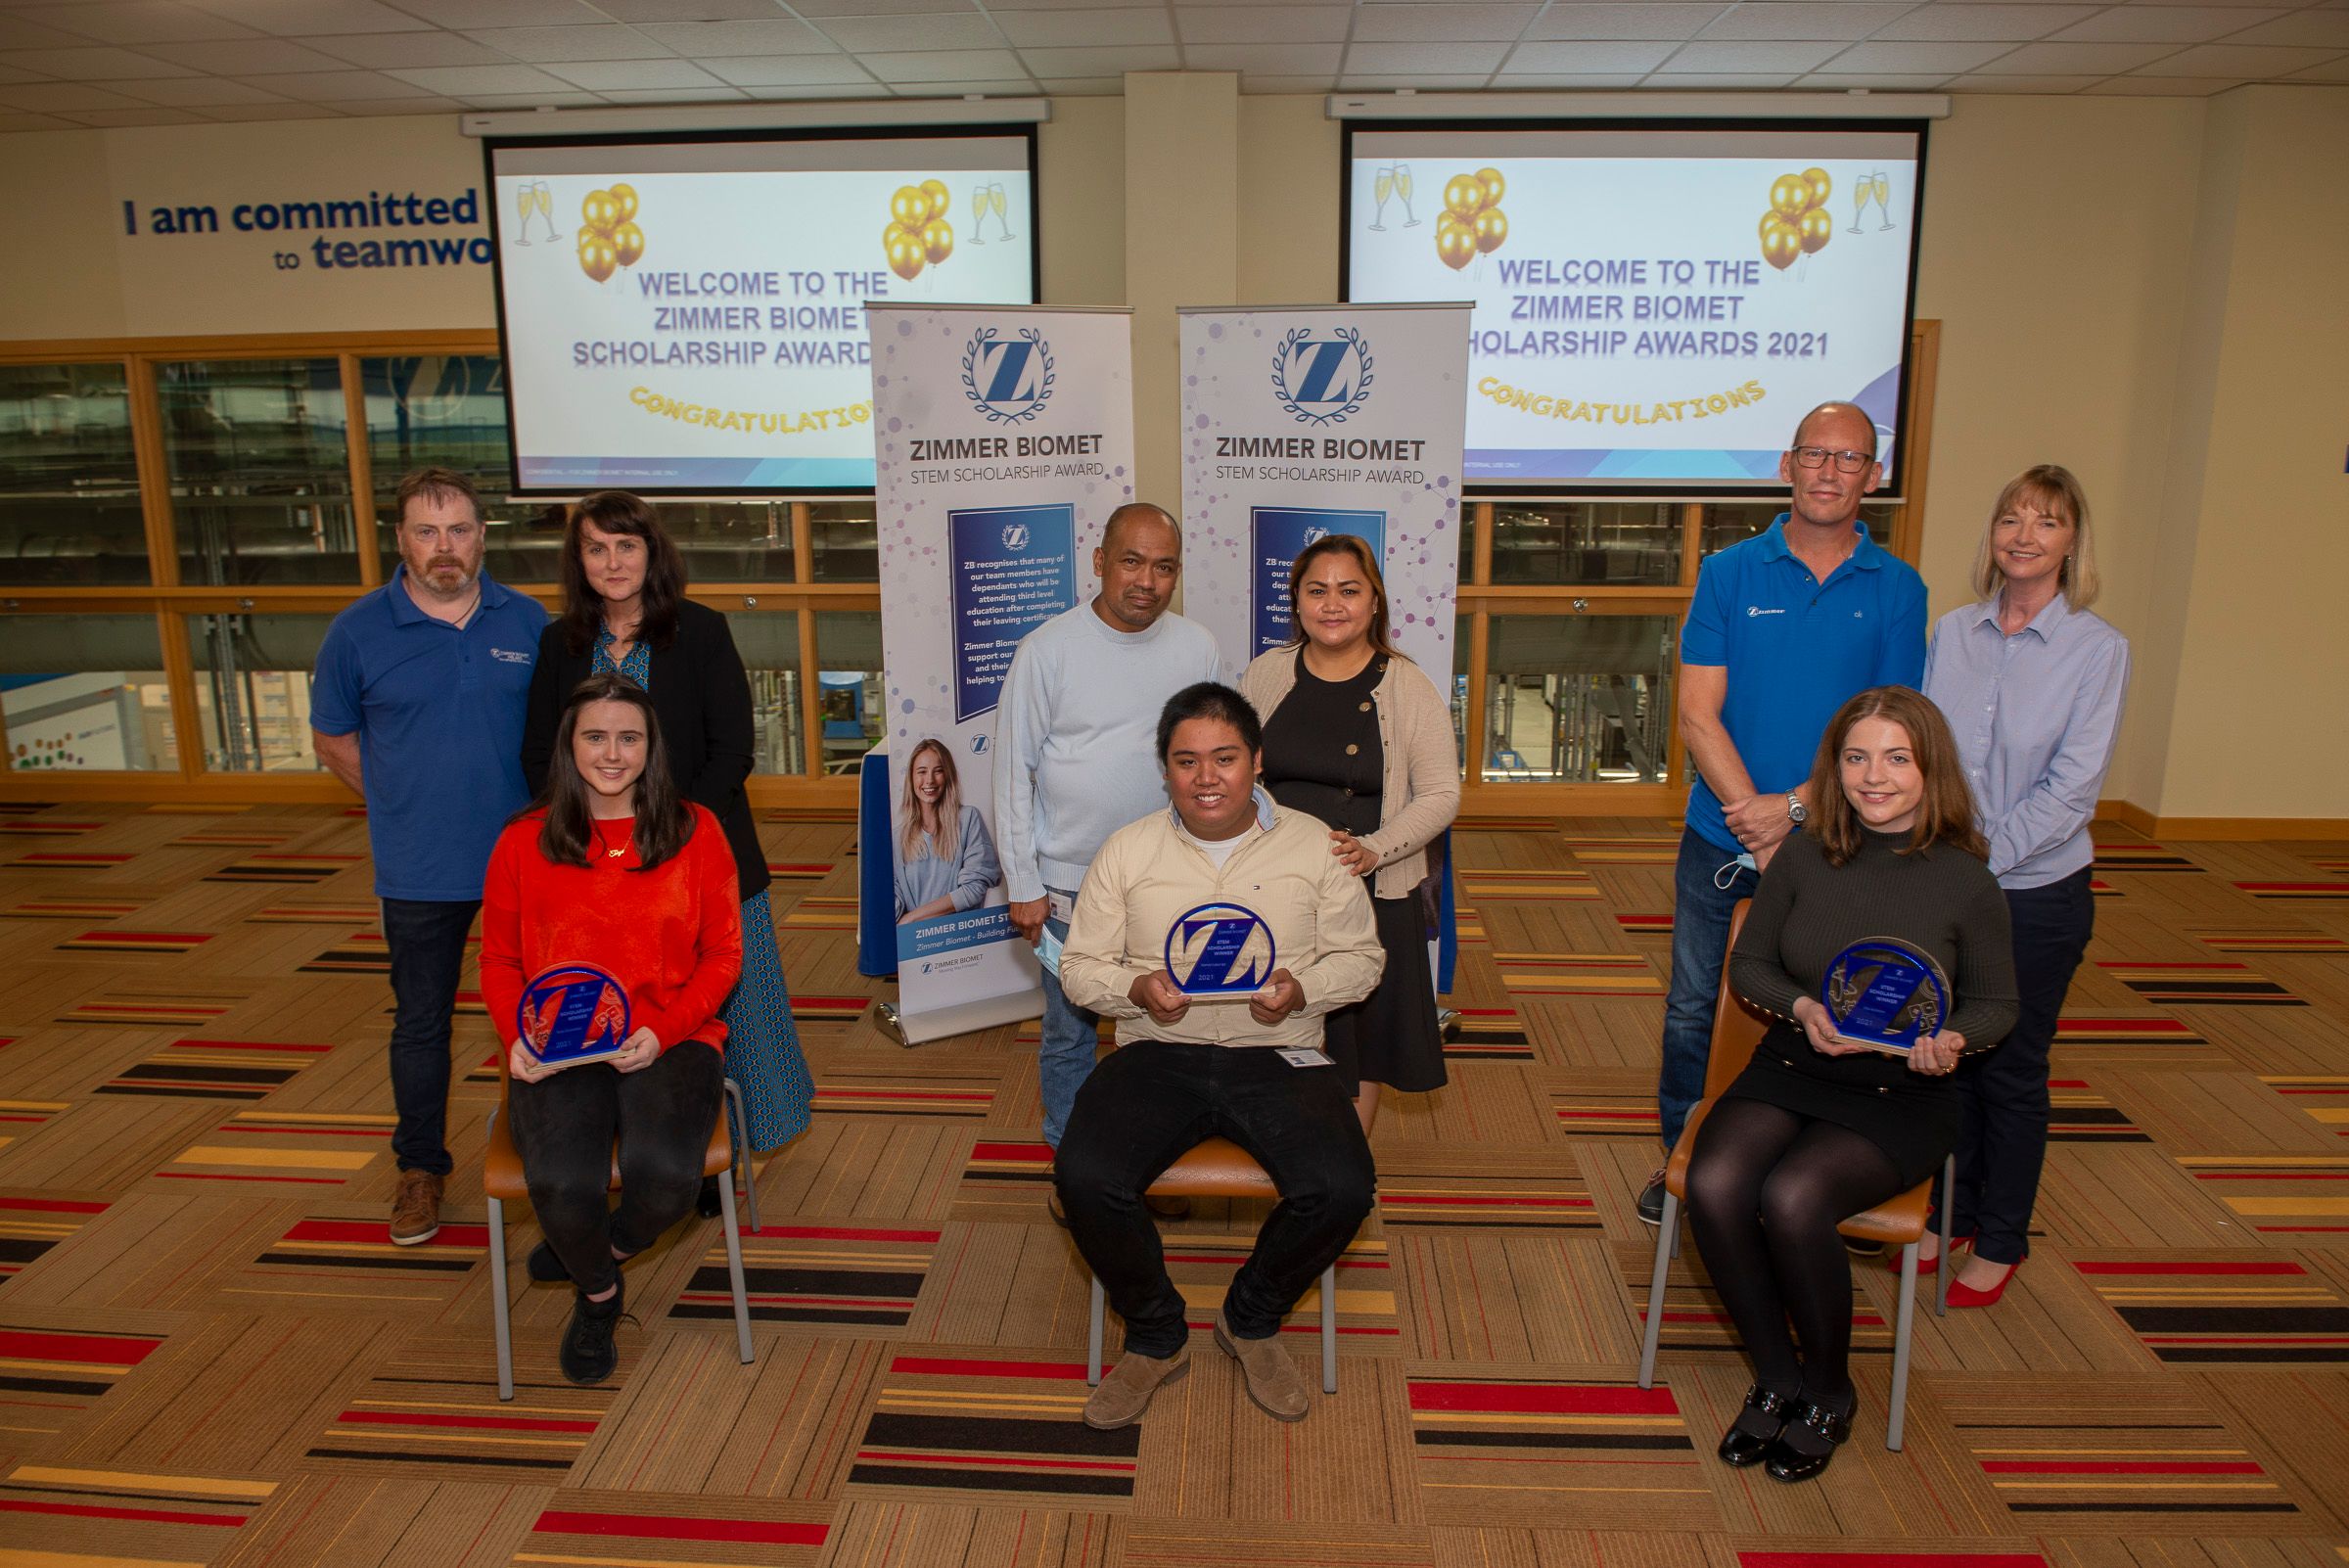 Zimmer Biomet Scholars 2021 pictured with their proud parents, left to right: Taryn, Adrian and Aisling Donnellan from Clarecastle; Ramon, Iannever and Samuel Lapurga from Shannon and Ellie, Ron and Catherine McMinn from Tipperary.